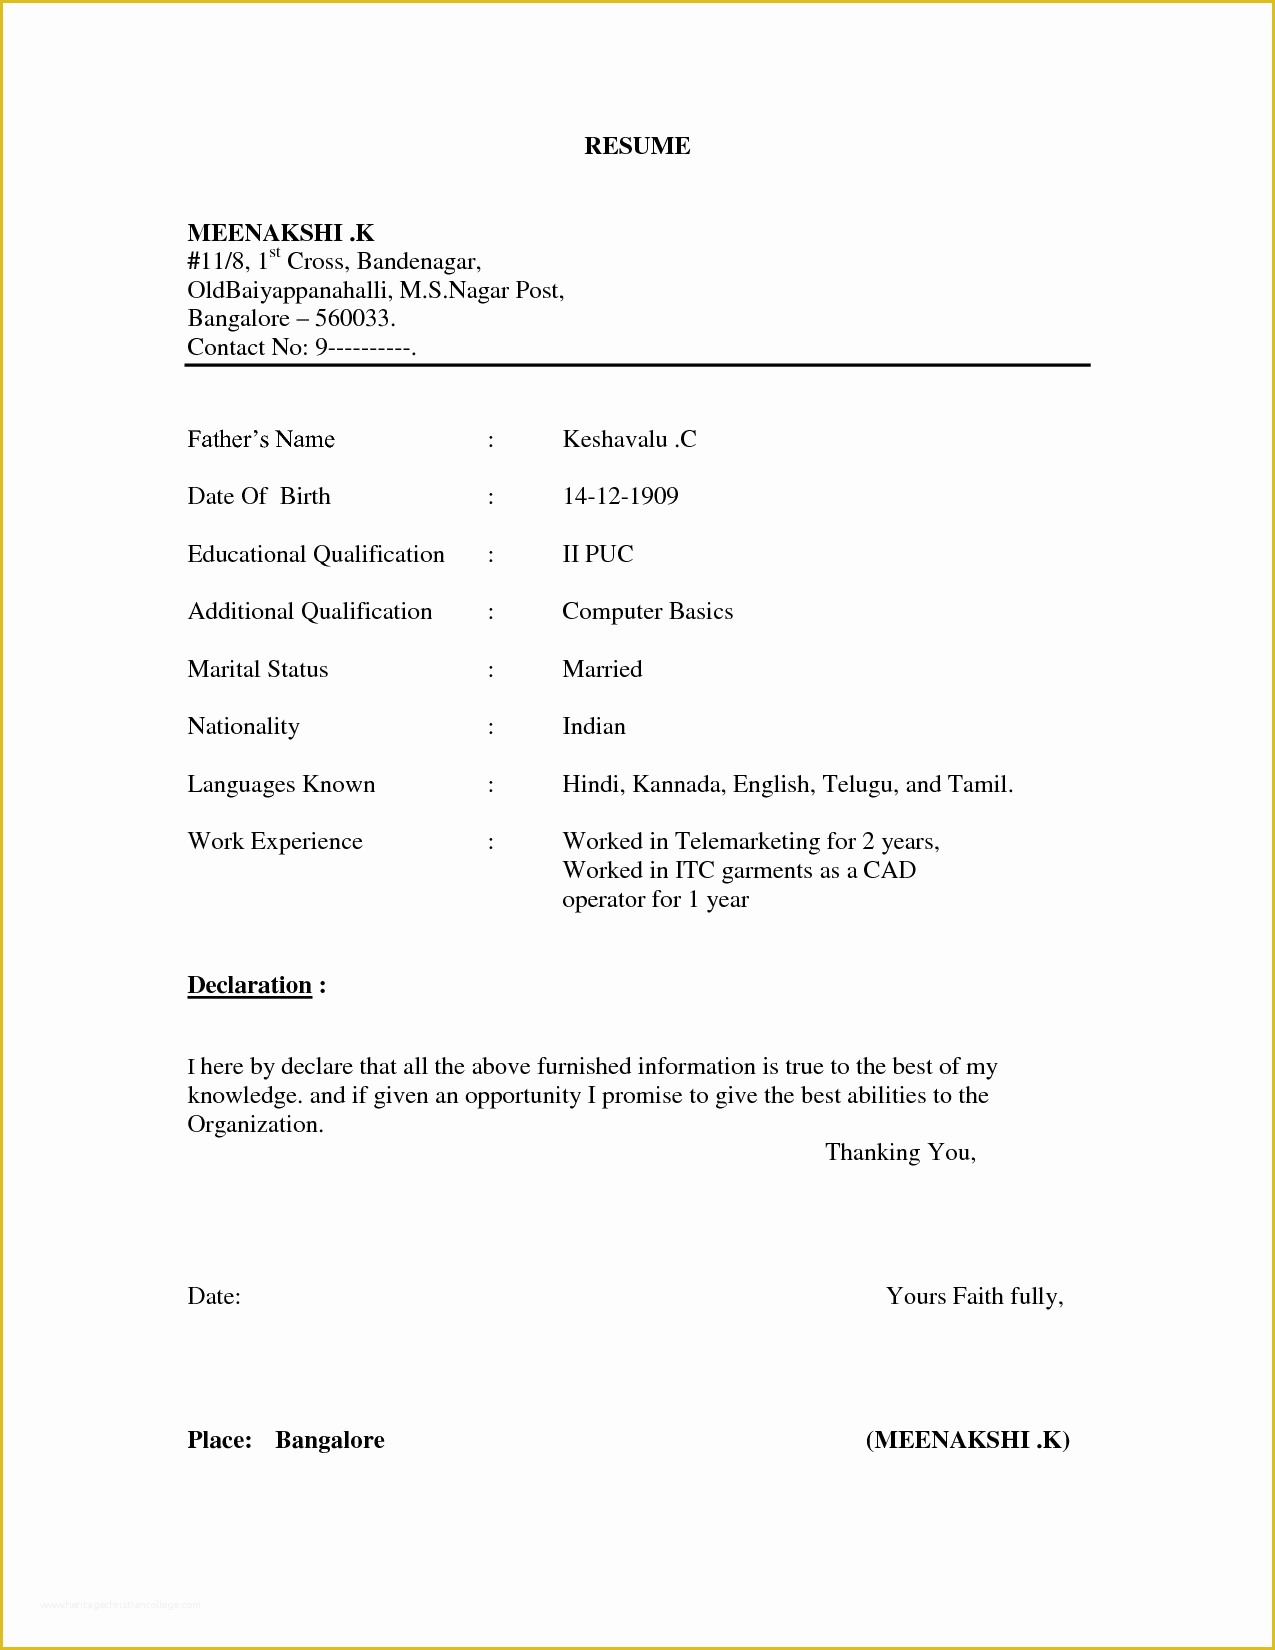 Resume Template Free Download Doc Of Resume format Doc File Download Resume format Doc File